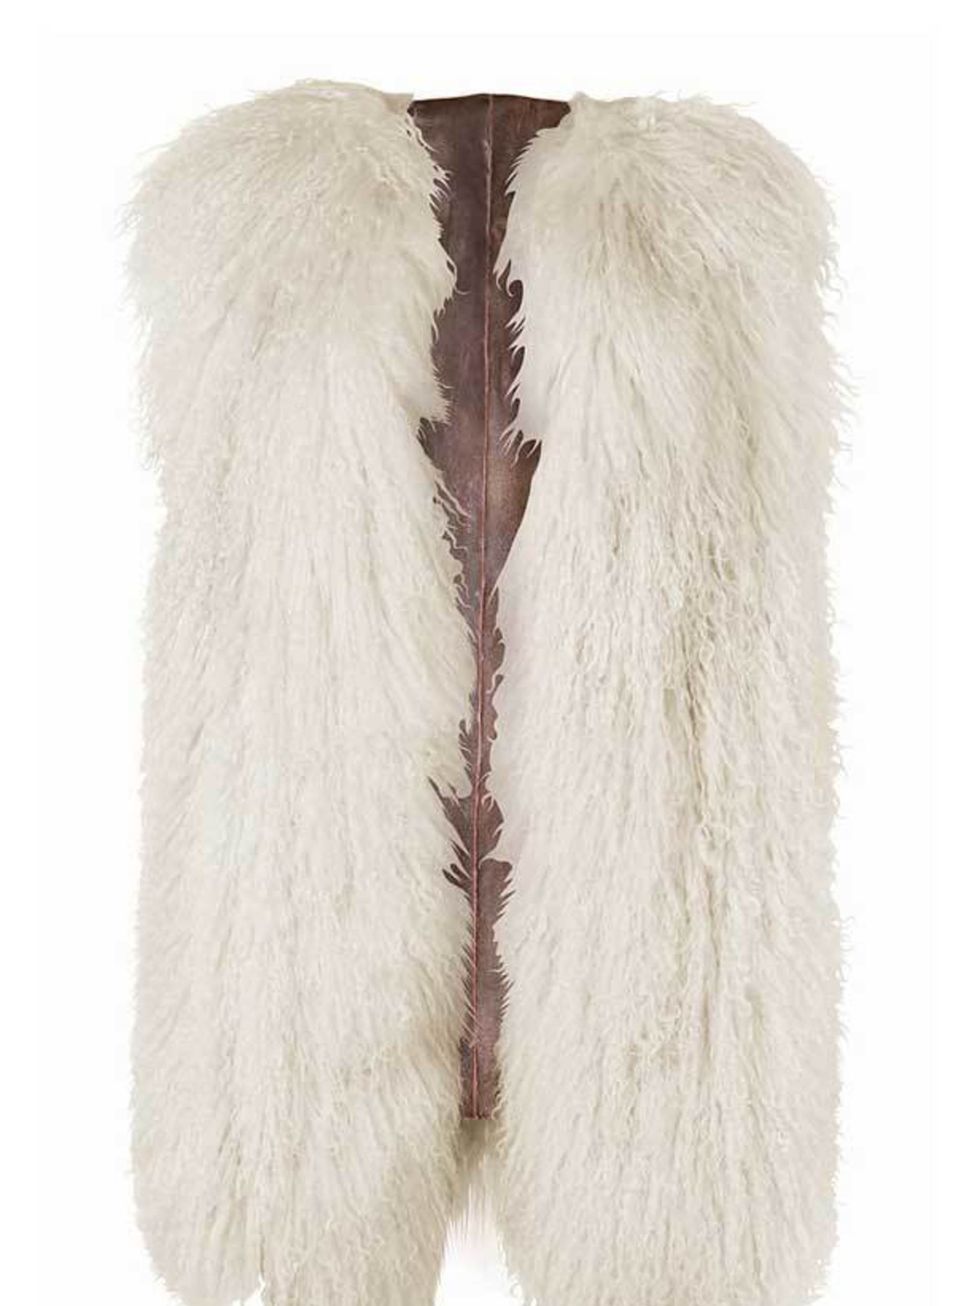 <p>Add a luxe edge to winter walks with this shearling gilet from Hilfiger Denims new capsule collection Hilfiger Denim shearling gilet, £225, for stockists call 0207 479 7550</p>